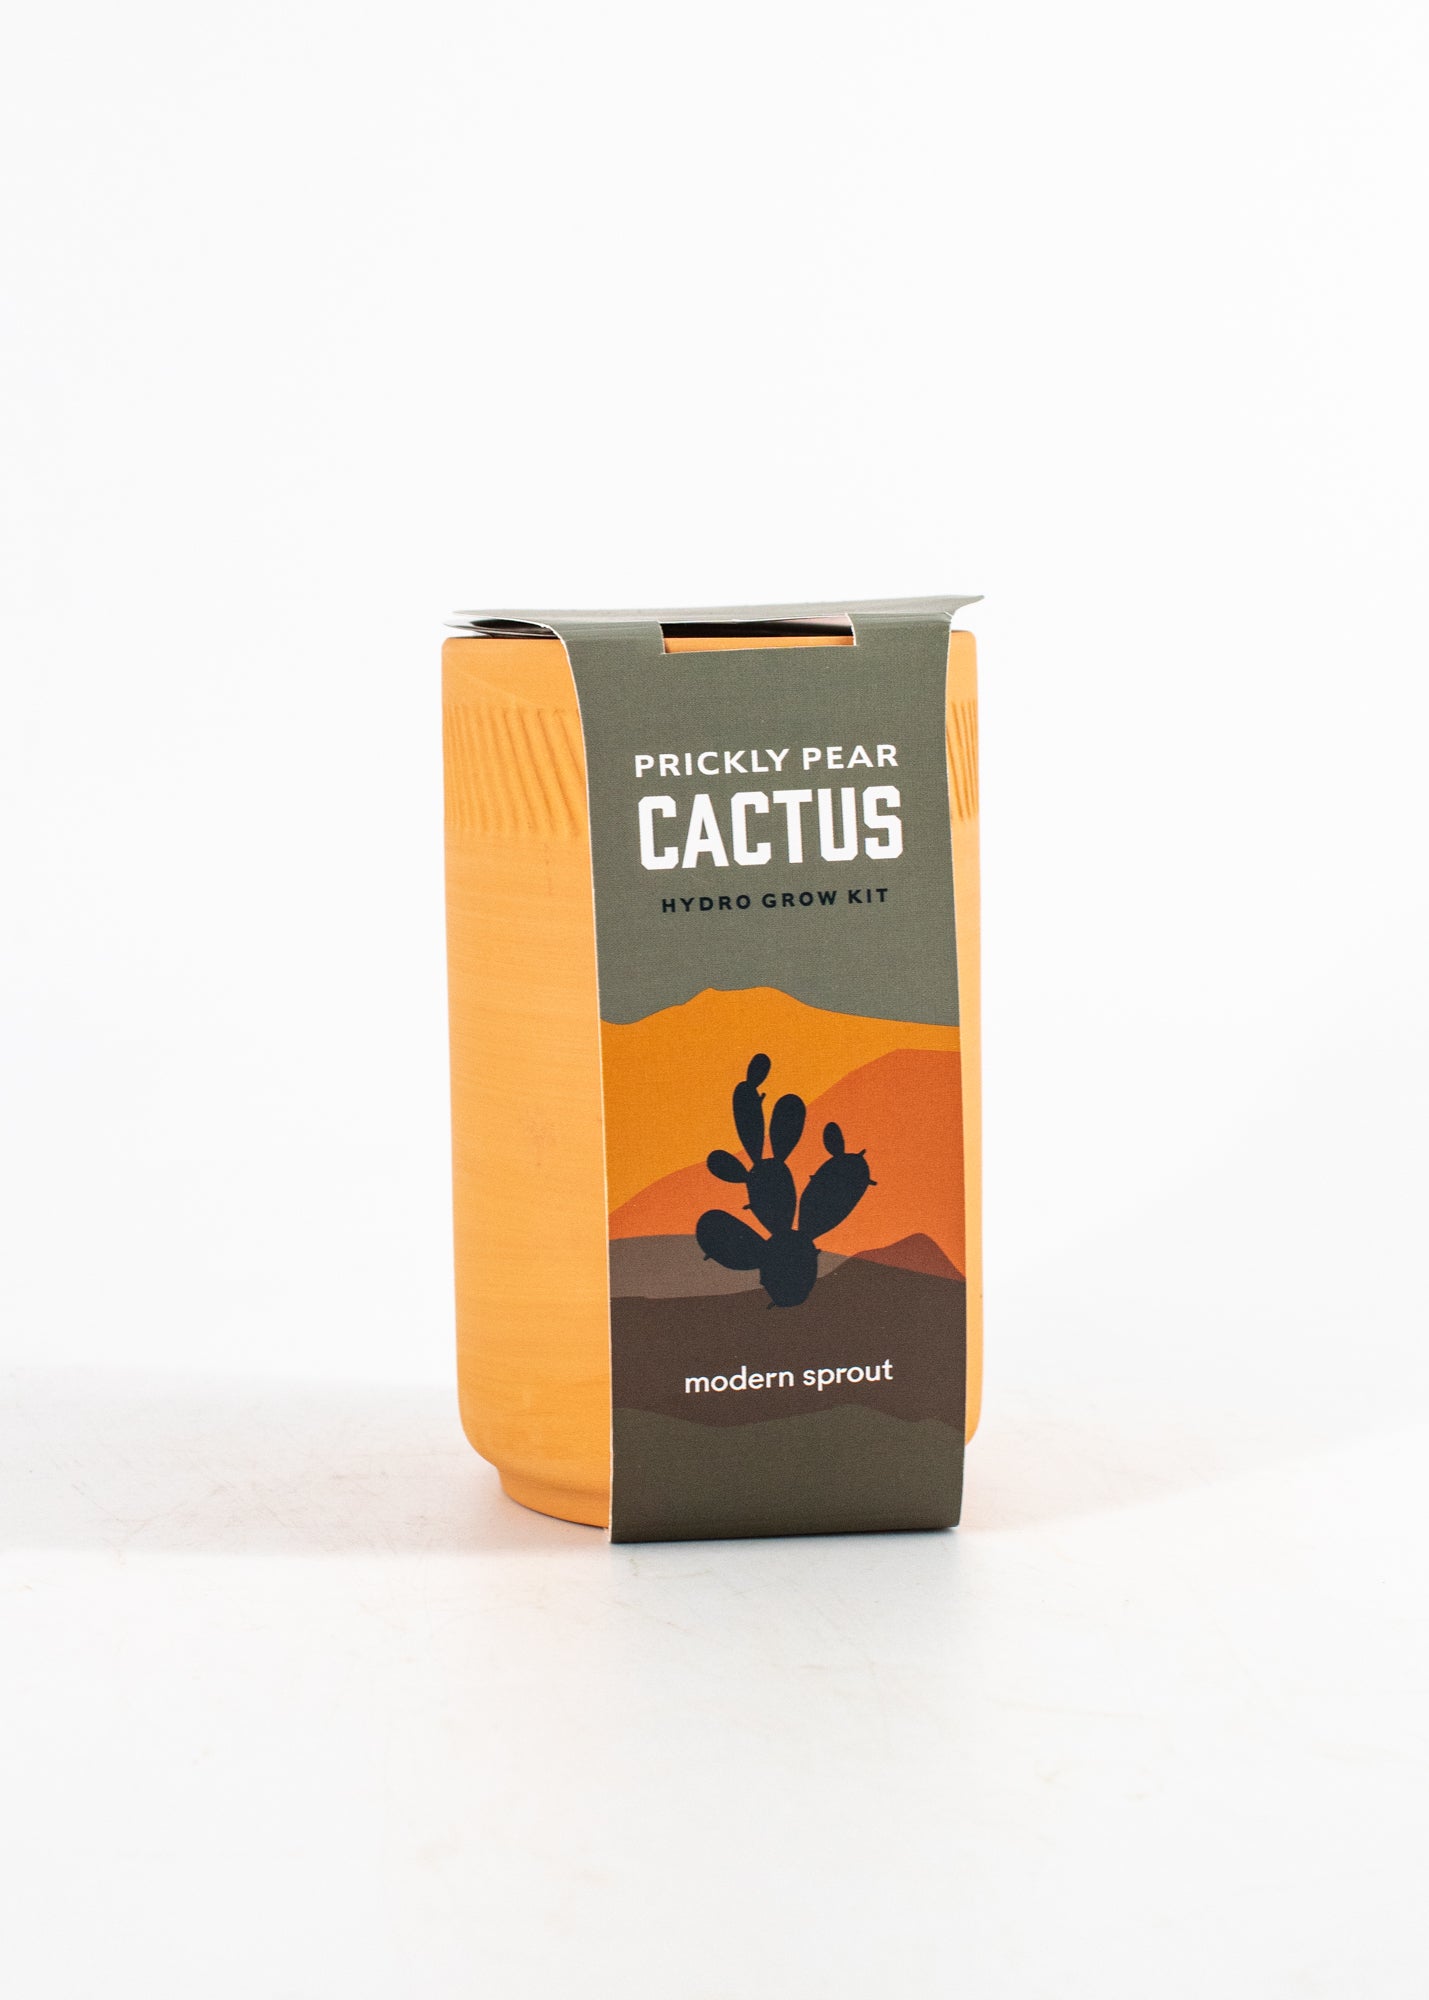 Prickly Pear Cactus Hydro Grow Kit -  - Modern Sprout - Wild Lark